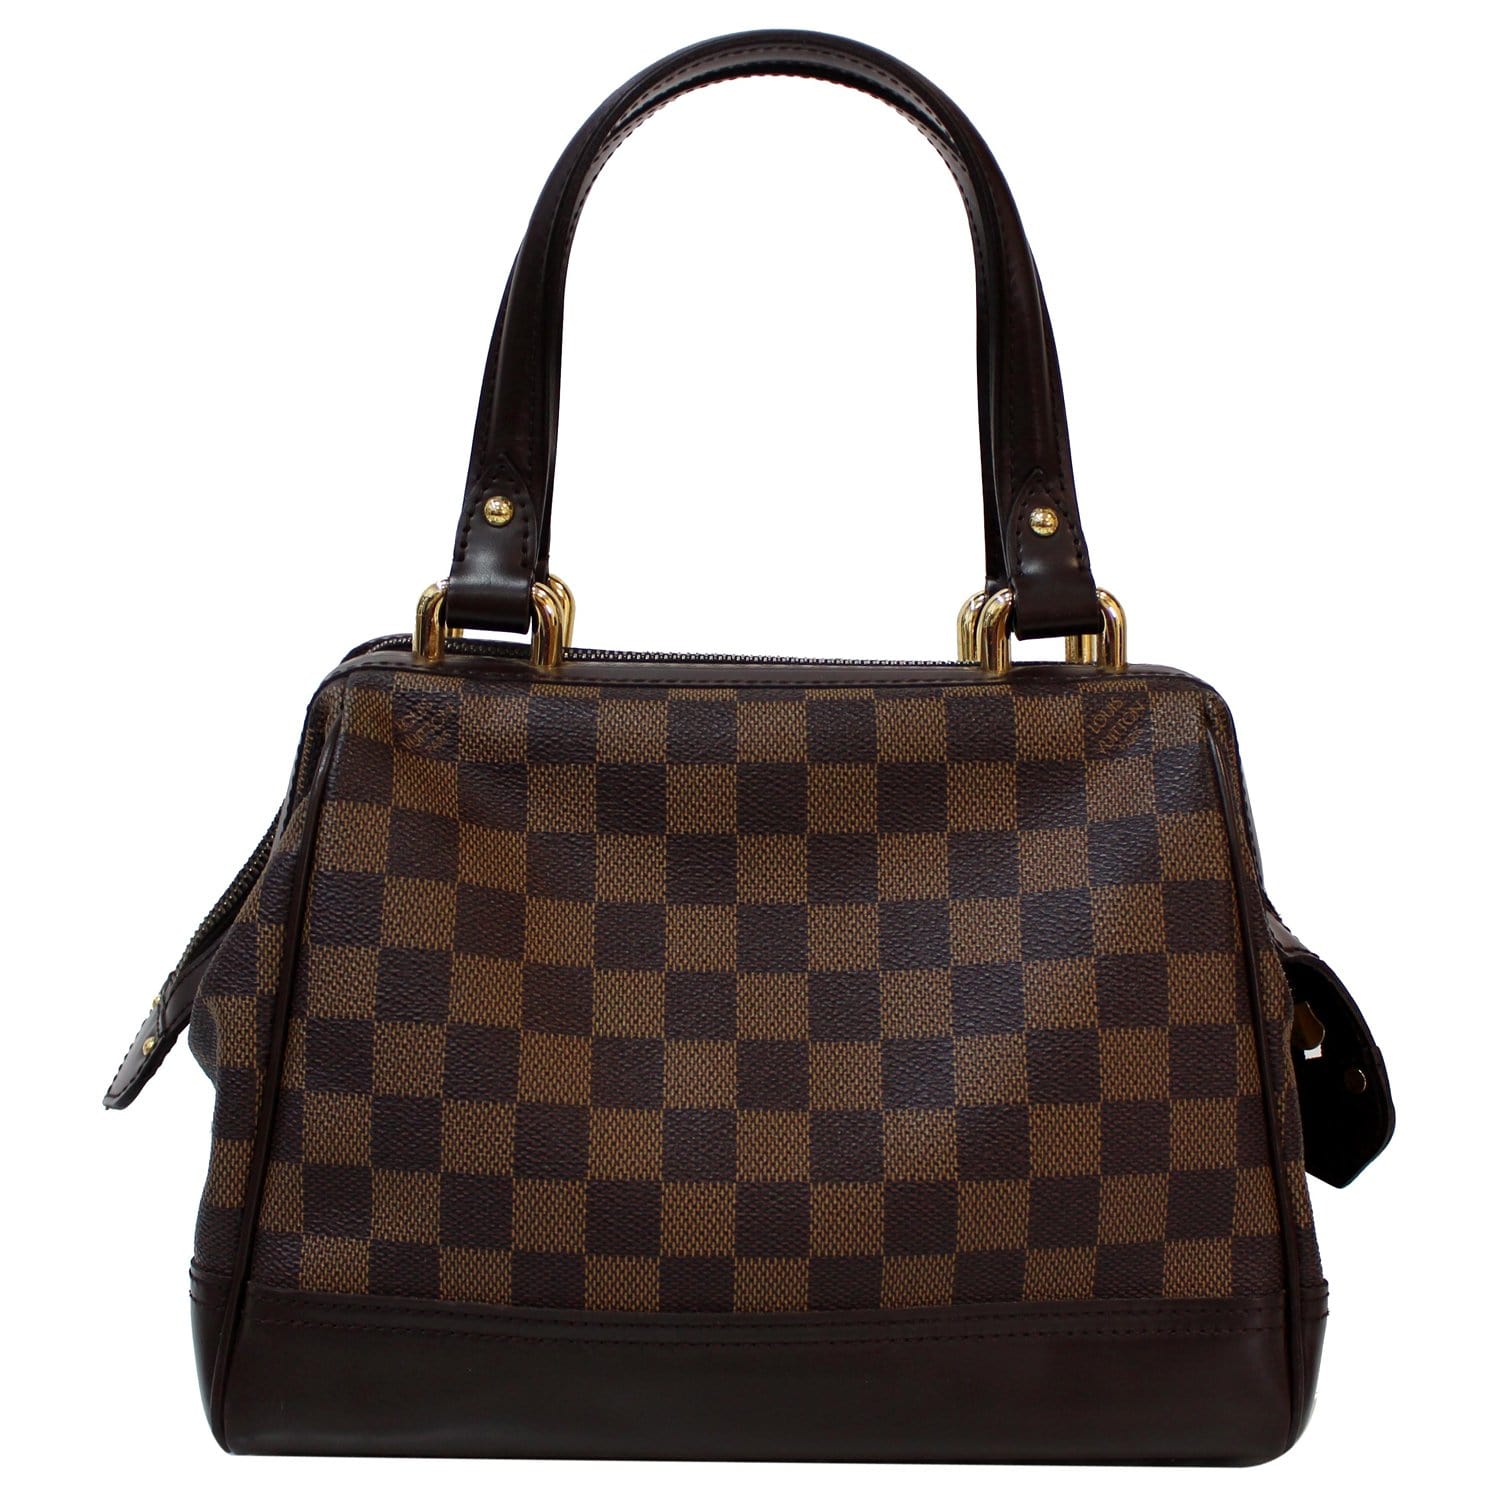 What's in my Bag? -- Louis Vuitton Knightsbridge Review 